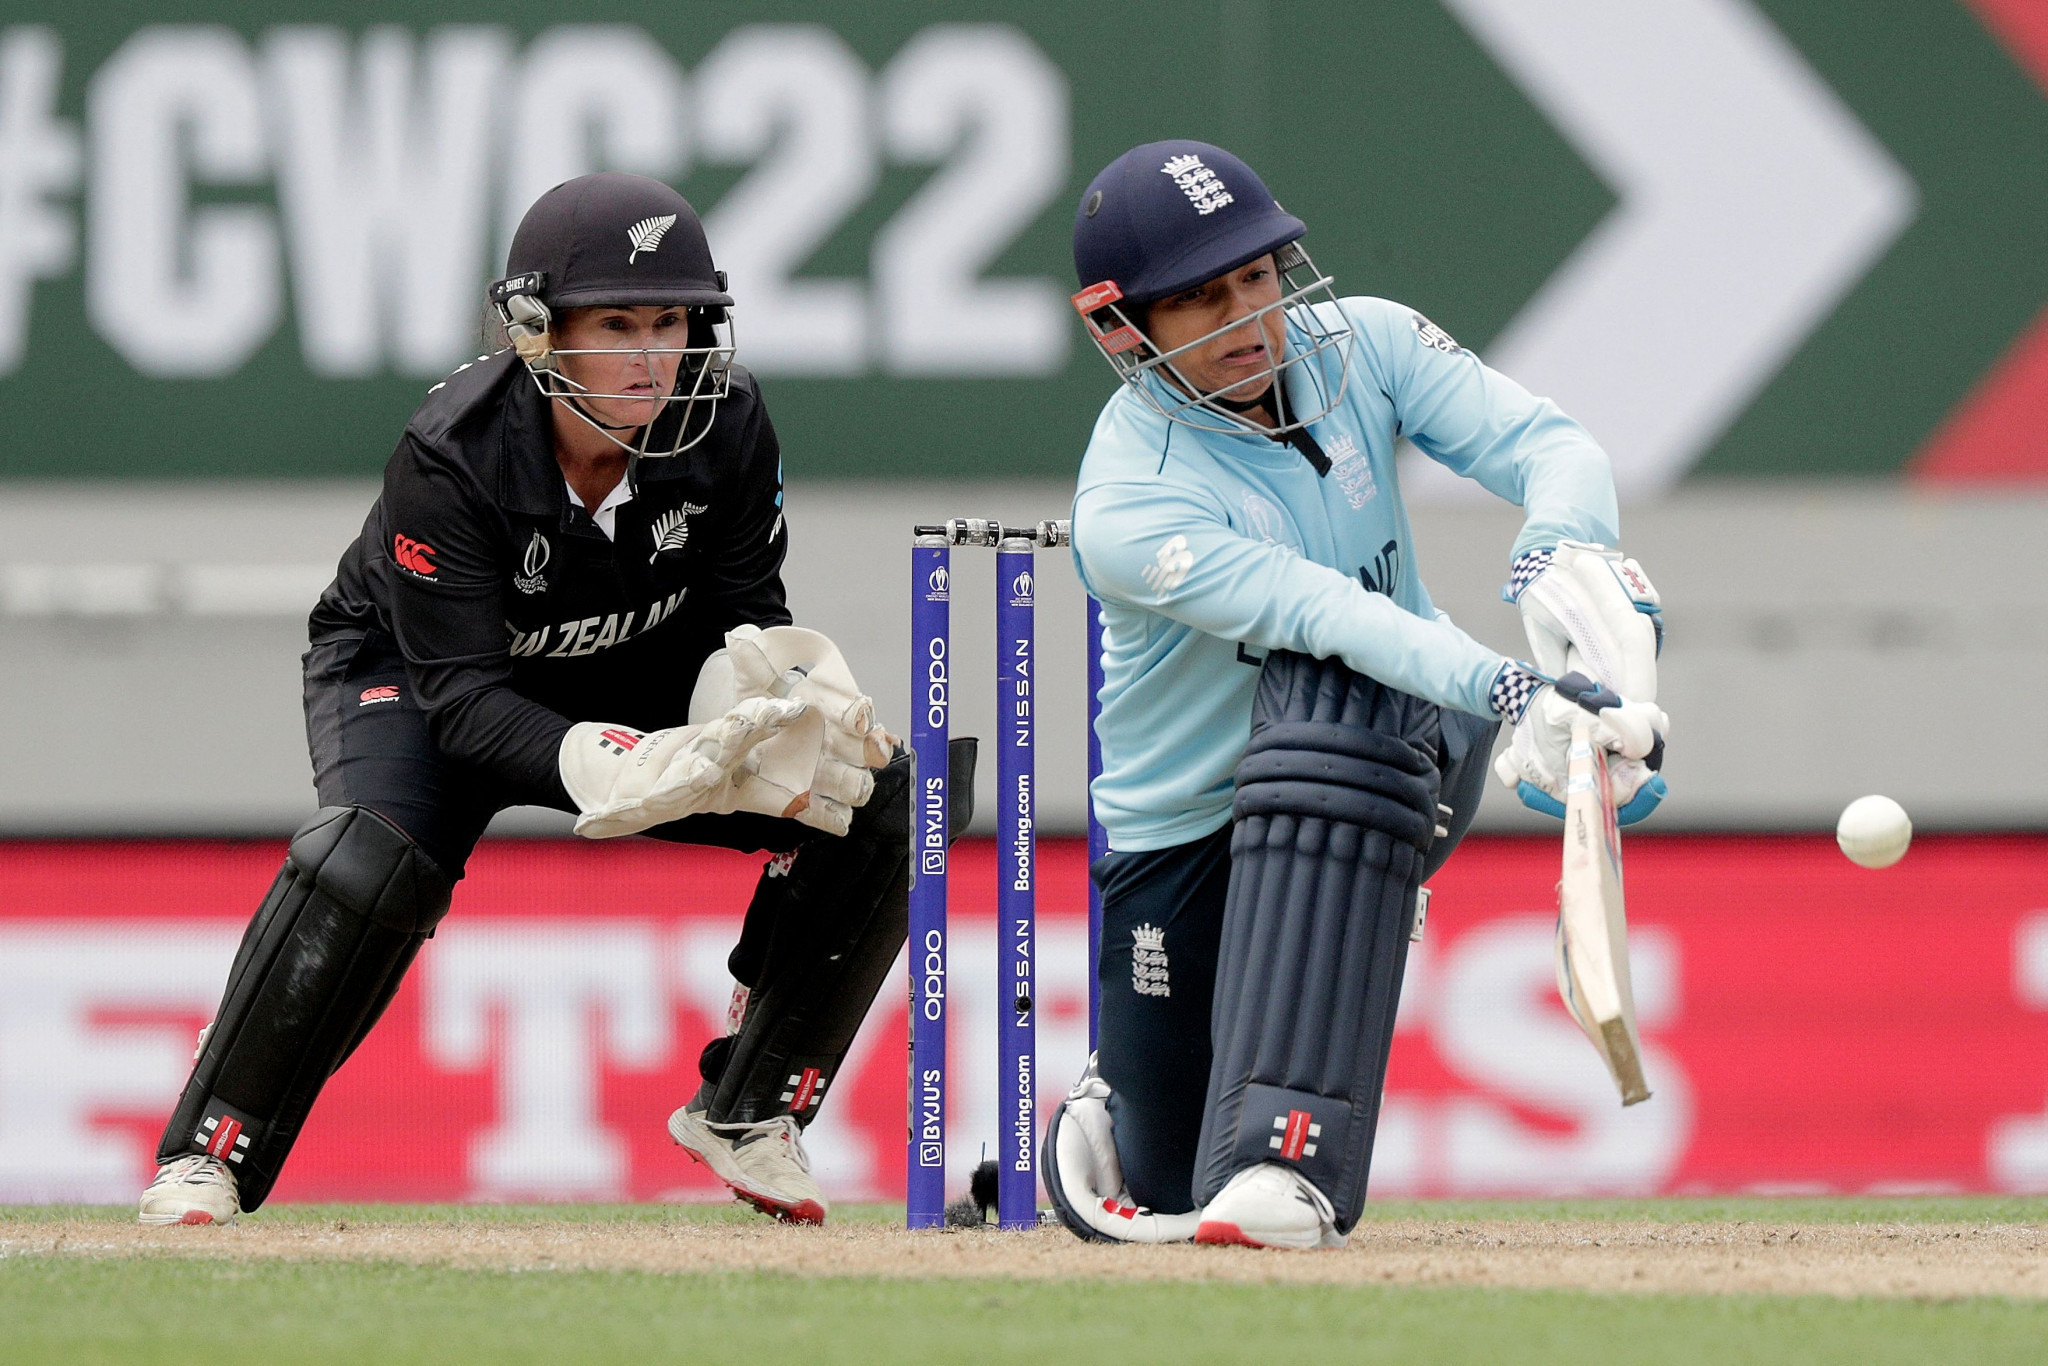 England completed their 204 run chase against New Zealand in Auckland to keep their hopes alive at the Women's Cricket World Cup ©Getty Images